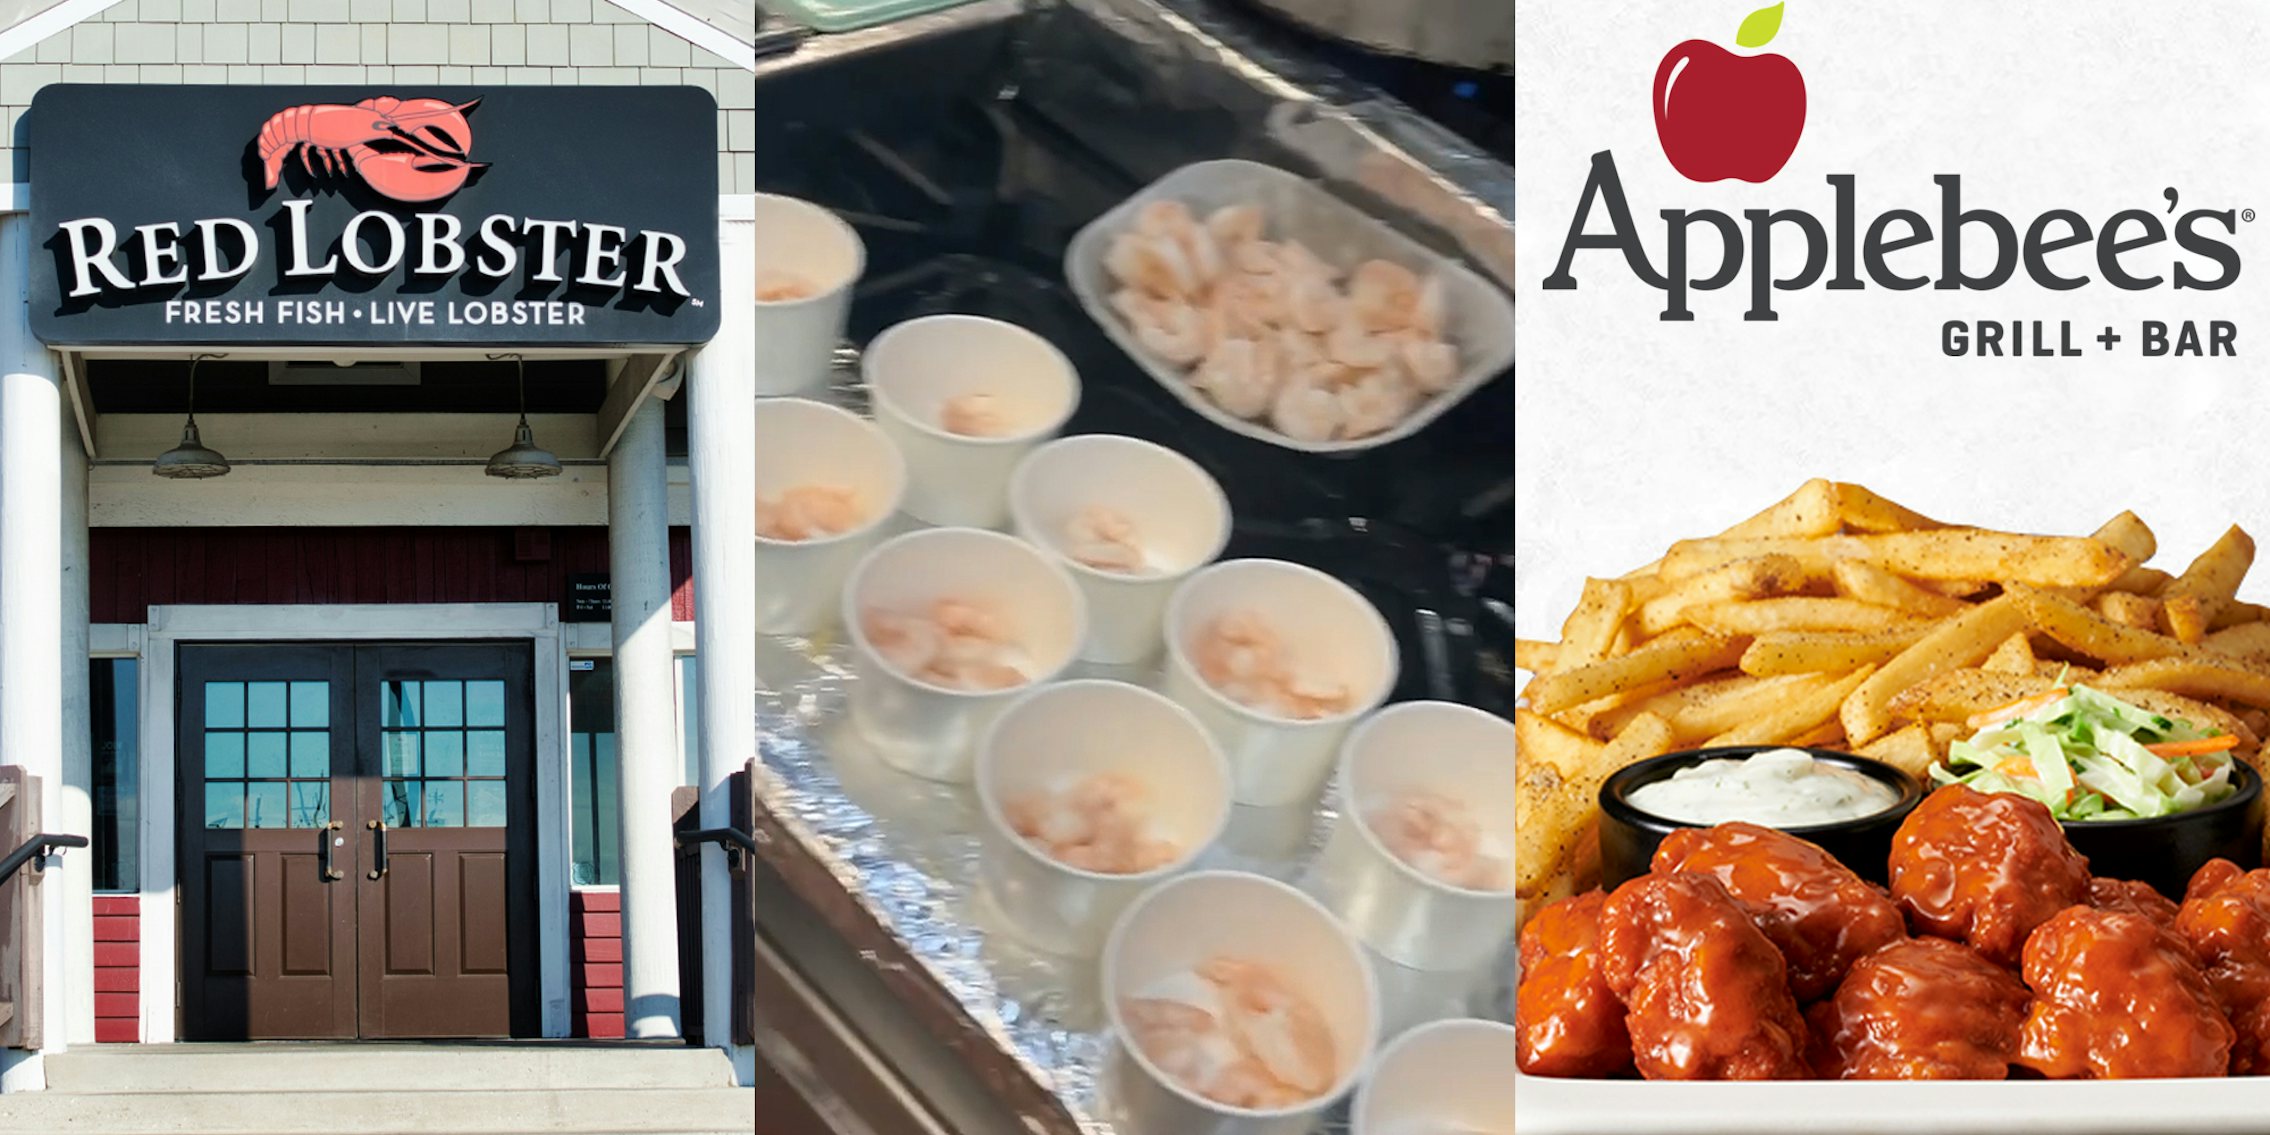 Red Lobster building with sign (l) Red Lobster shrimp in cups (c) Applebee's logo with boneless wings and fries on plate (r)